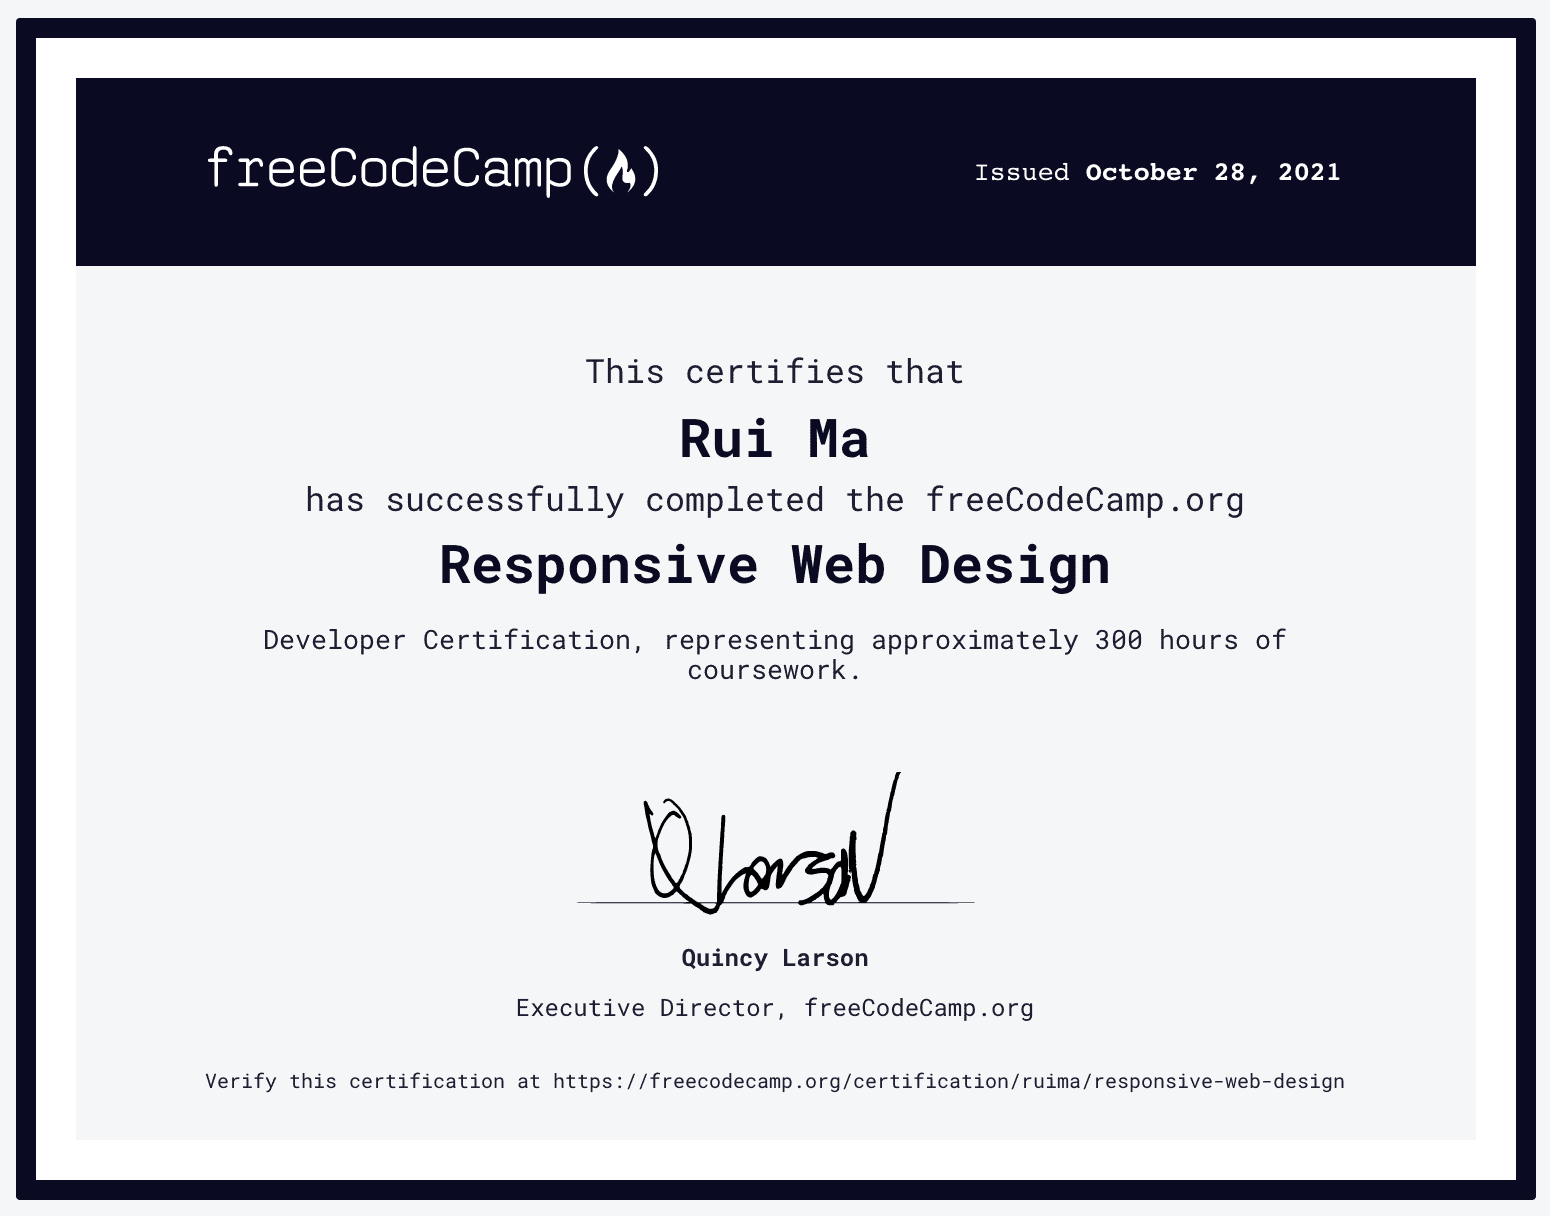 freeCodeCamp Certificate